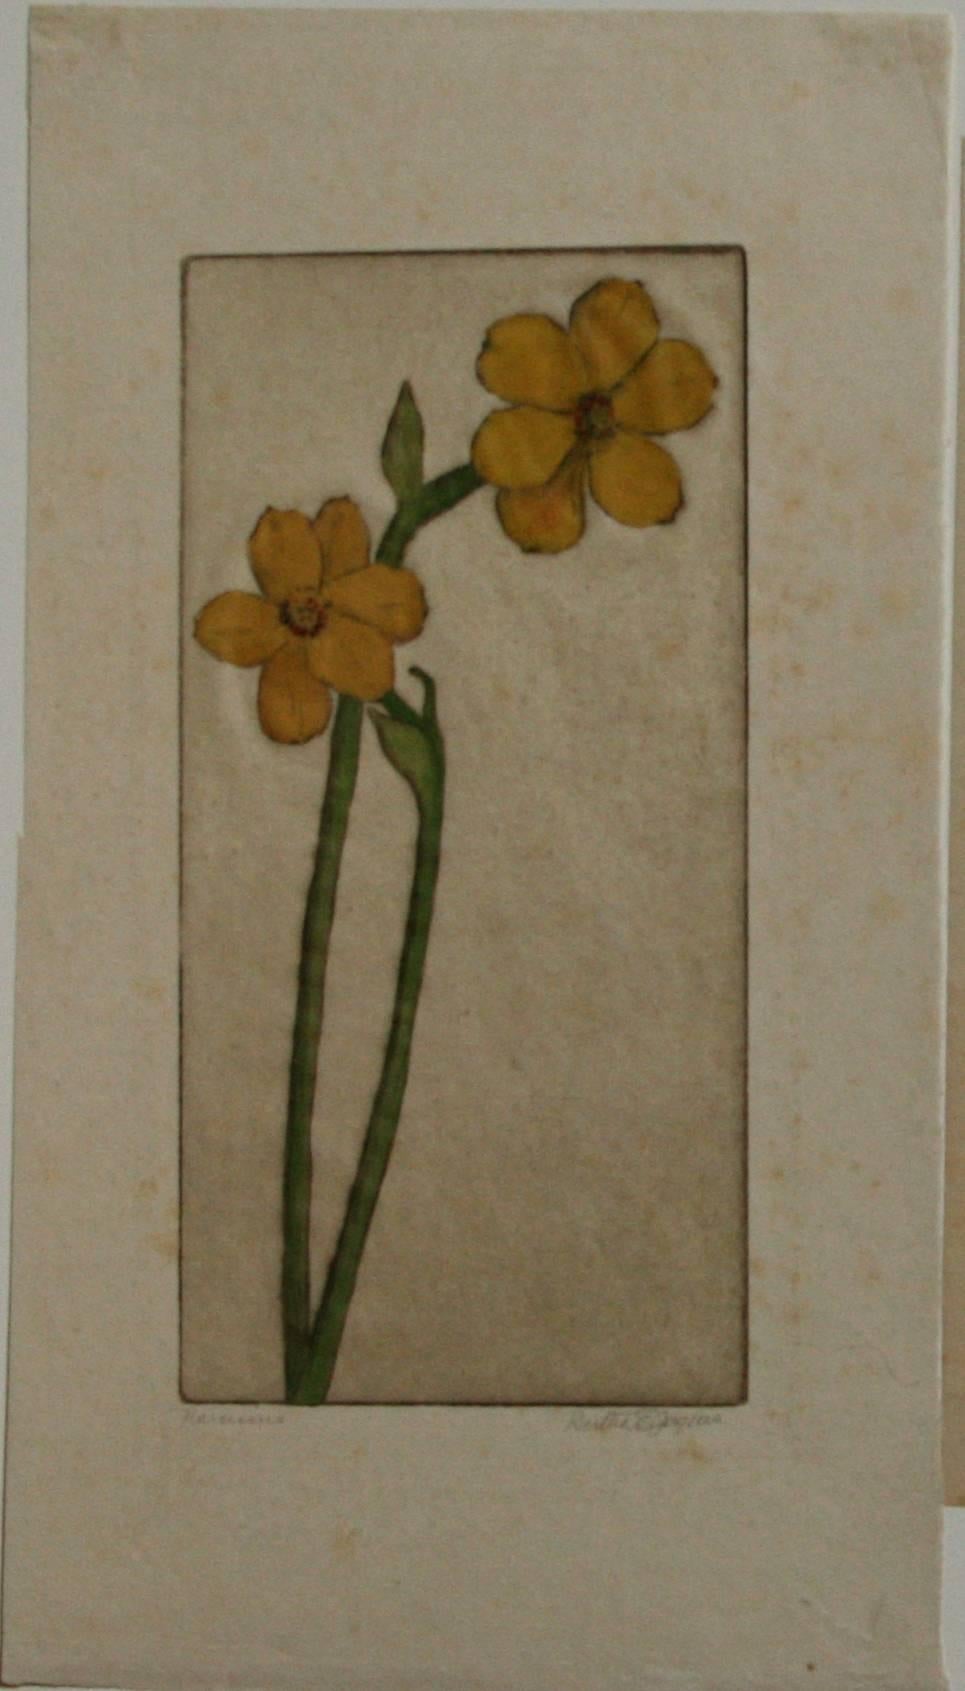 Narcissus. - Print by Bertha Evelyn Clausen Jaques